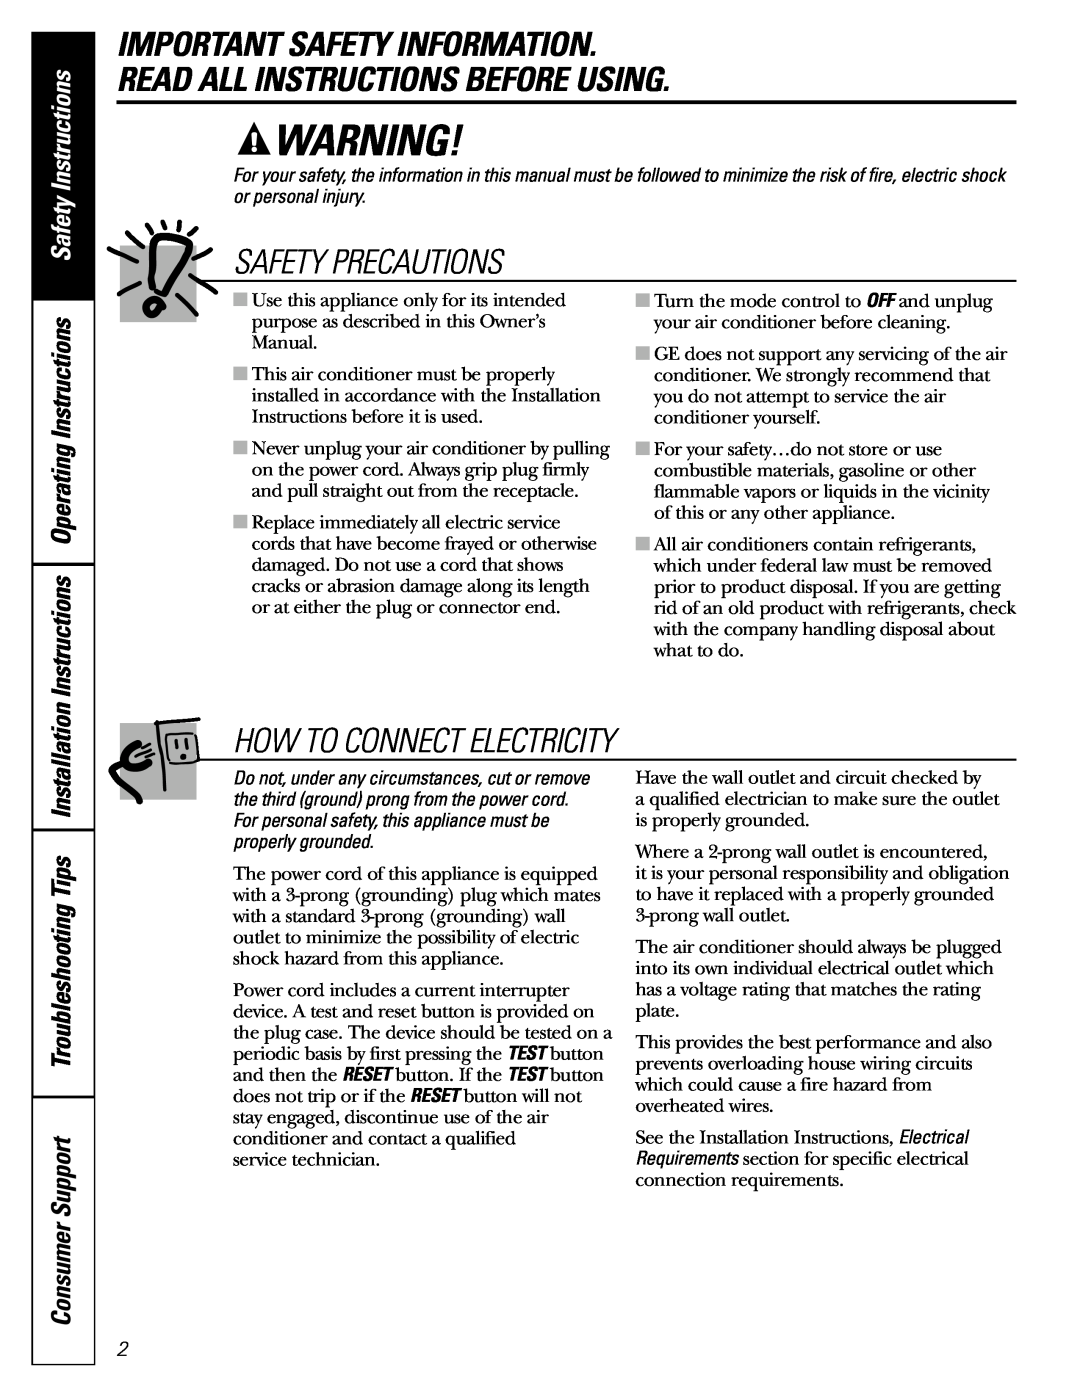 GE AGW06 Important Safety Information, Read All Instructions Before Using, Safety Precautions, How To Connect Electricity 